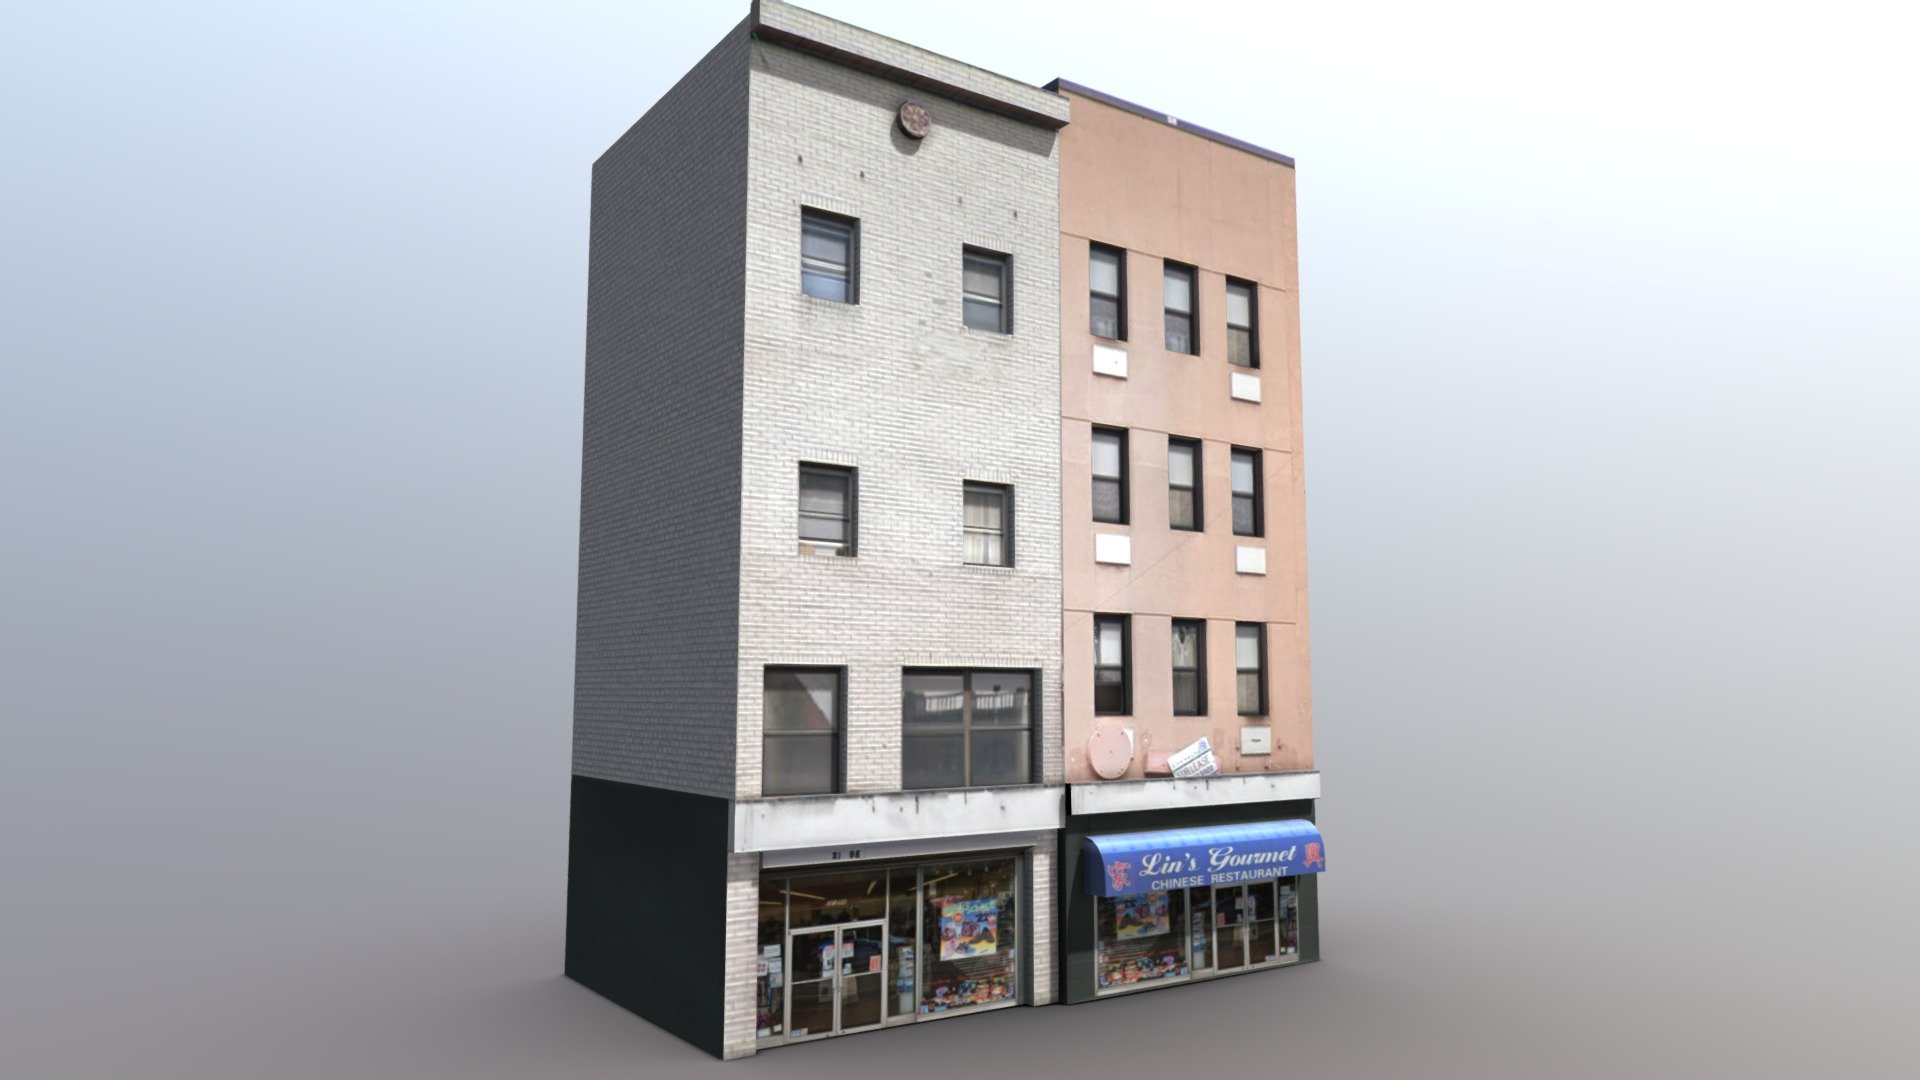 Low poly NYC Bronx buildings with stores. High definition PBR textures.

Feedback much apprieciated 3d model